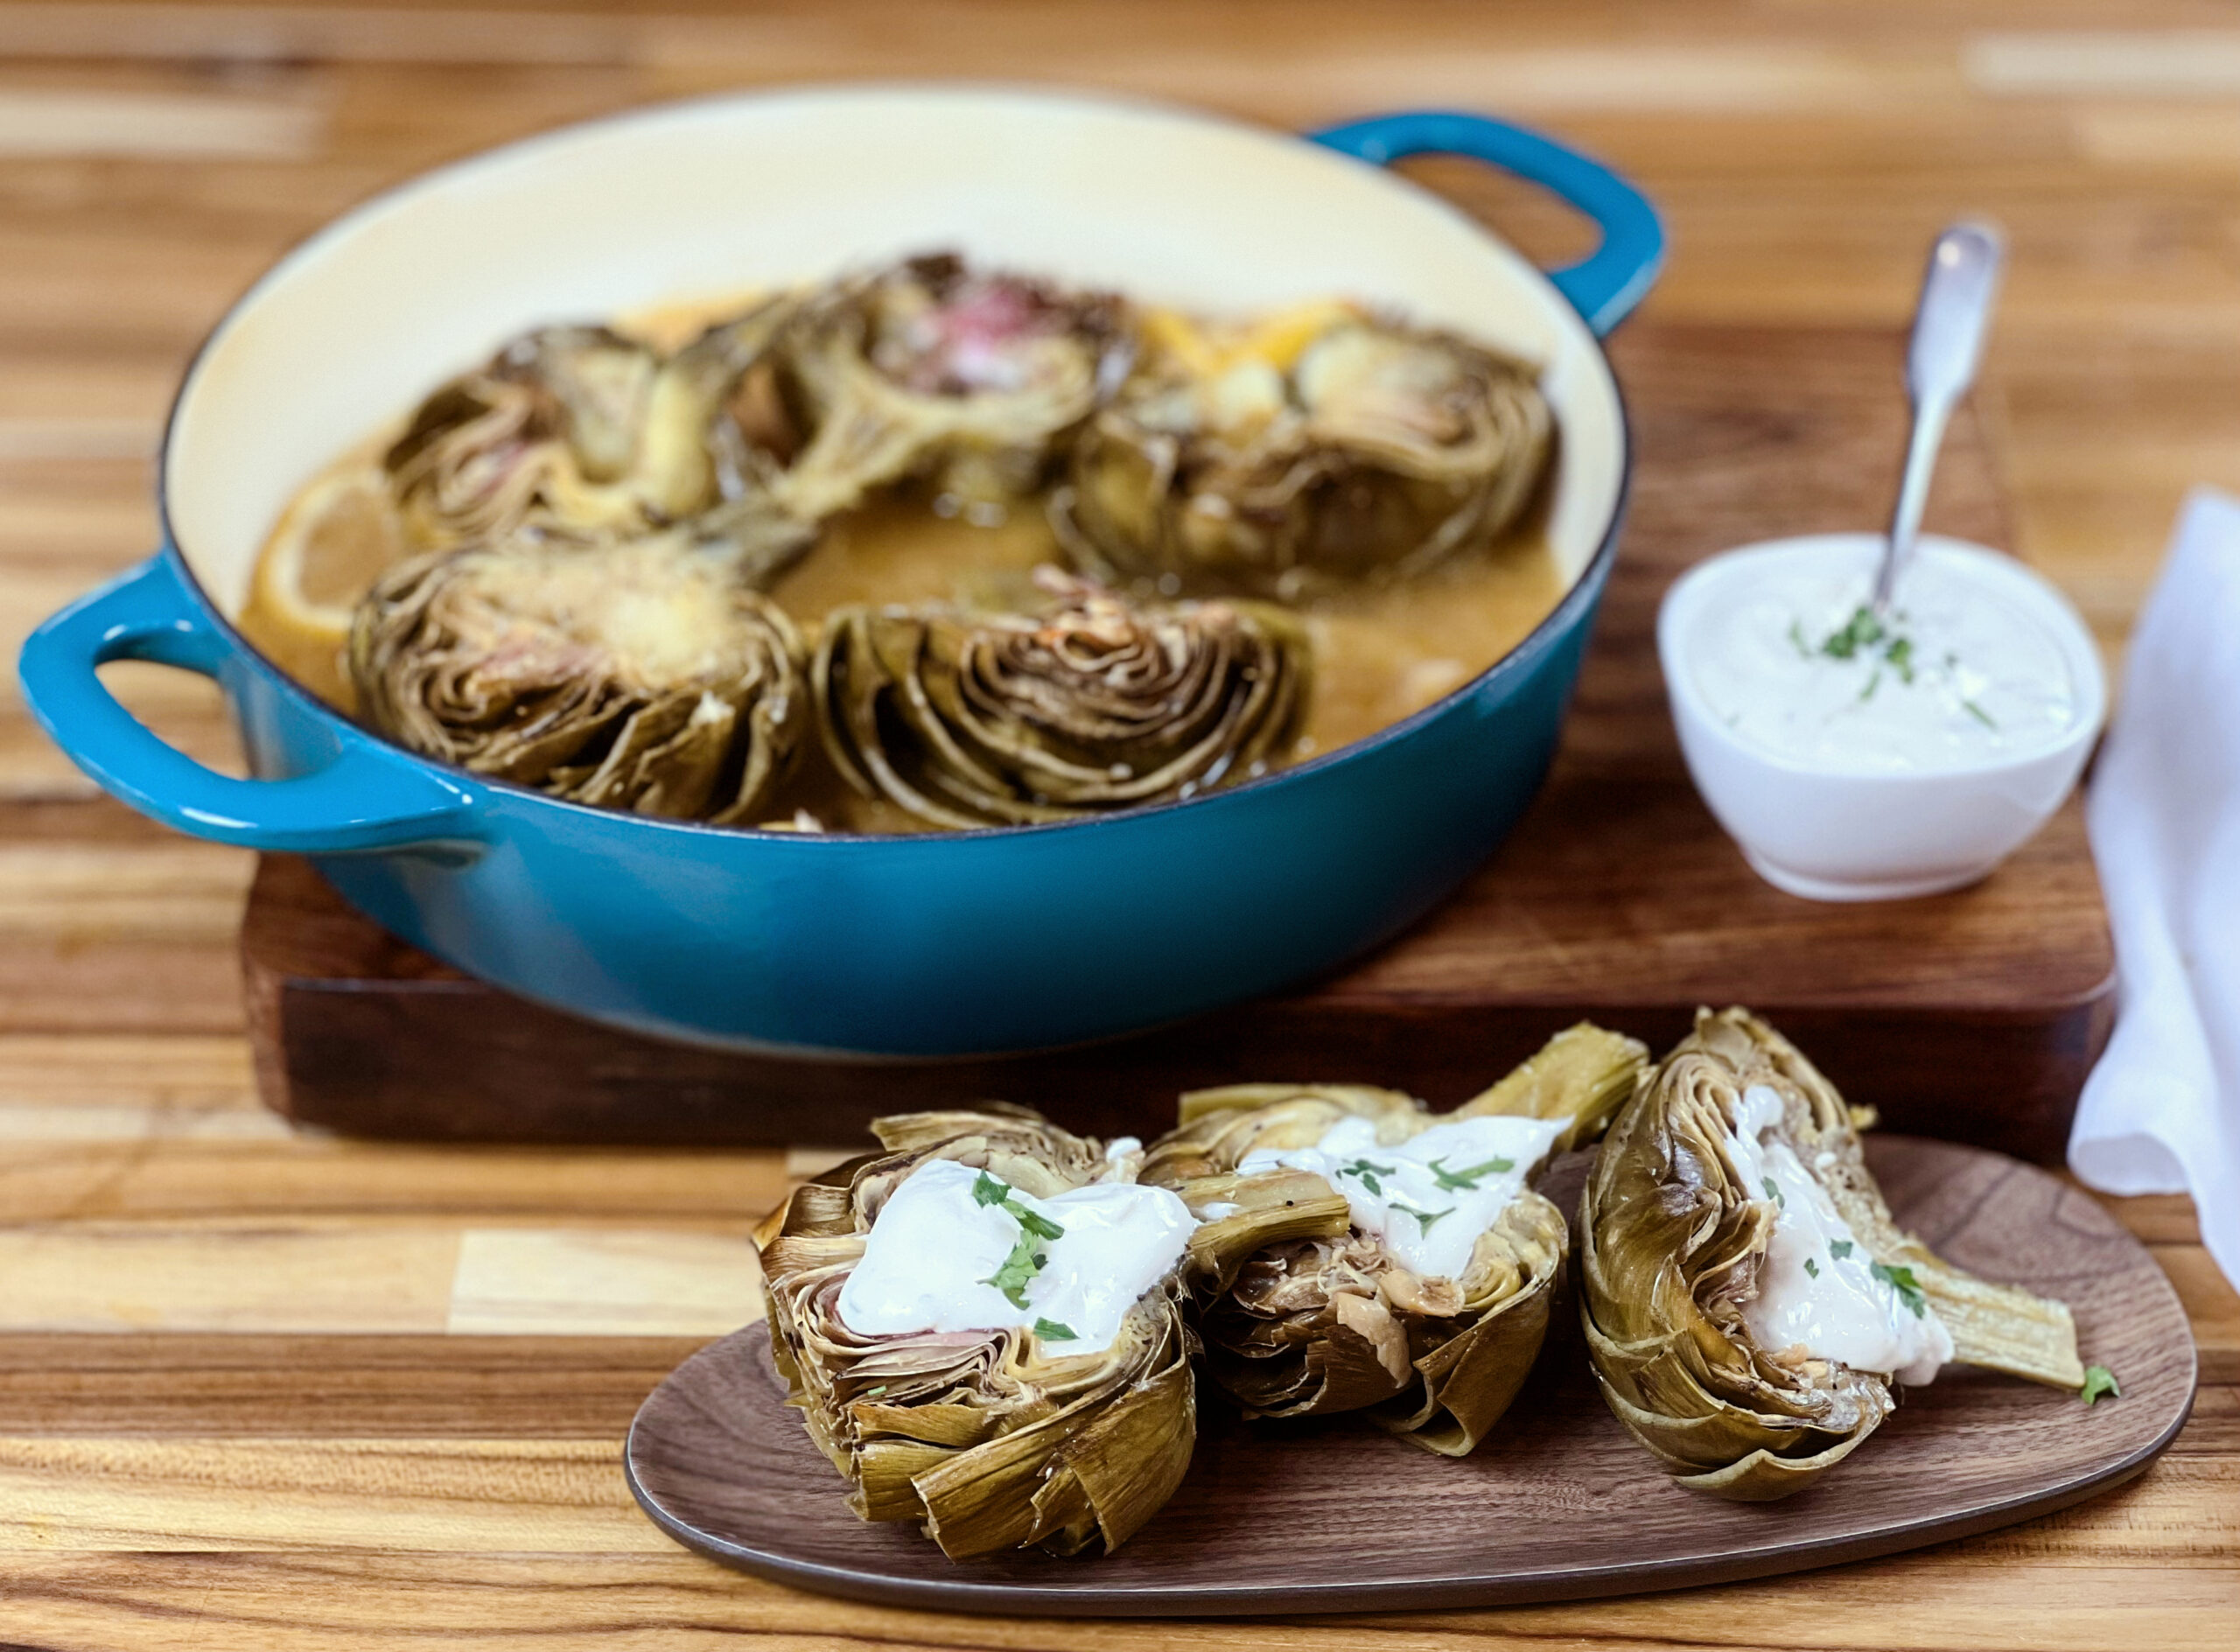 Pan of braised artichoke hearts with a side of dipping sauce